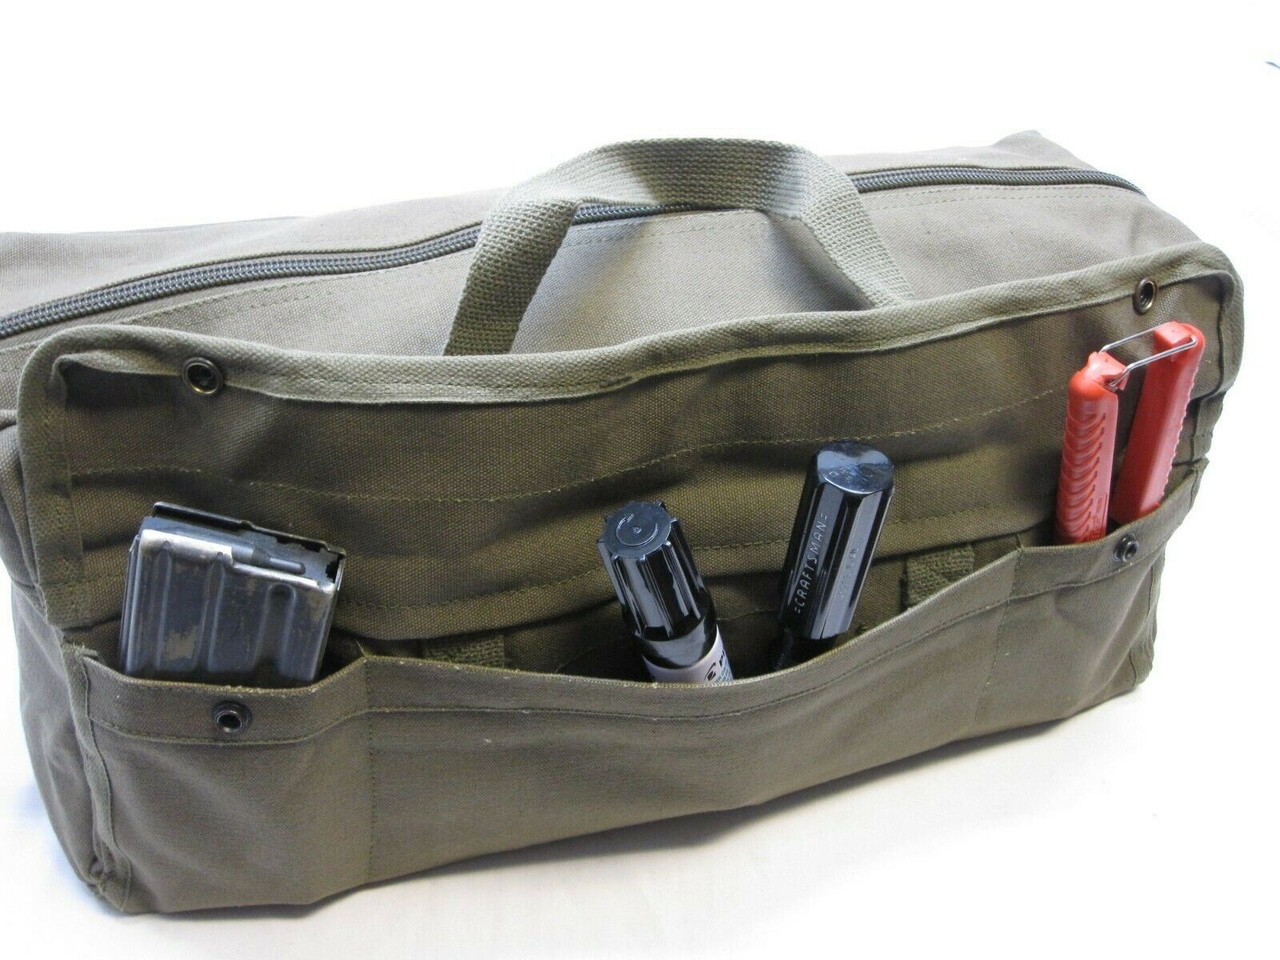 LARGE MILITARY STYLE MECHANICS TOOL BAG HEAVY DUTY COTTON CANVAS DUFFEL PACK